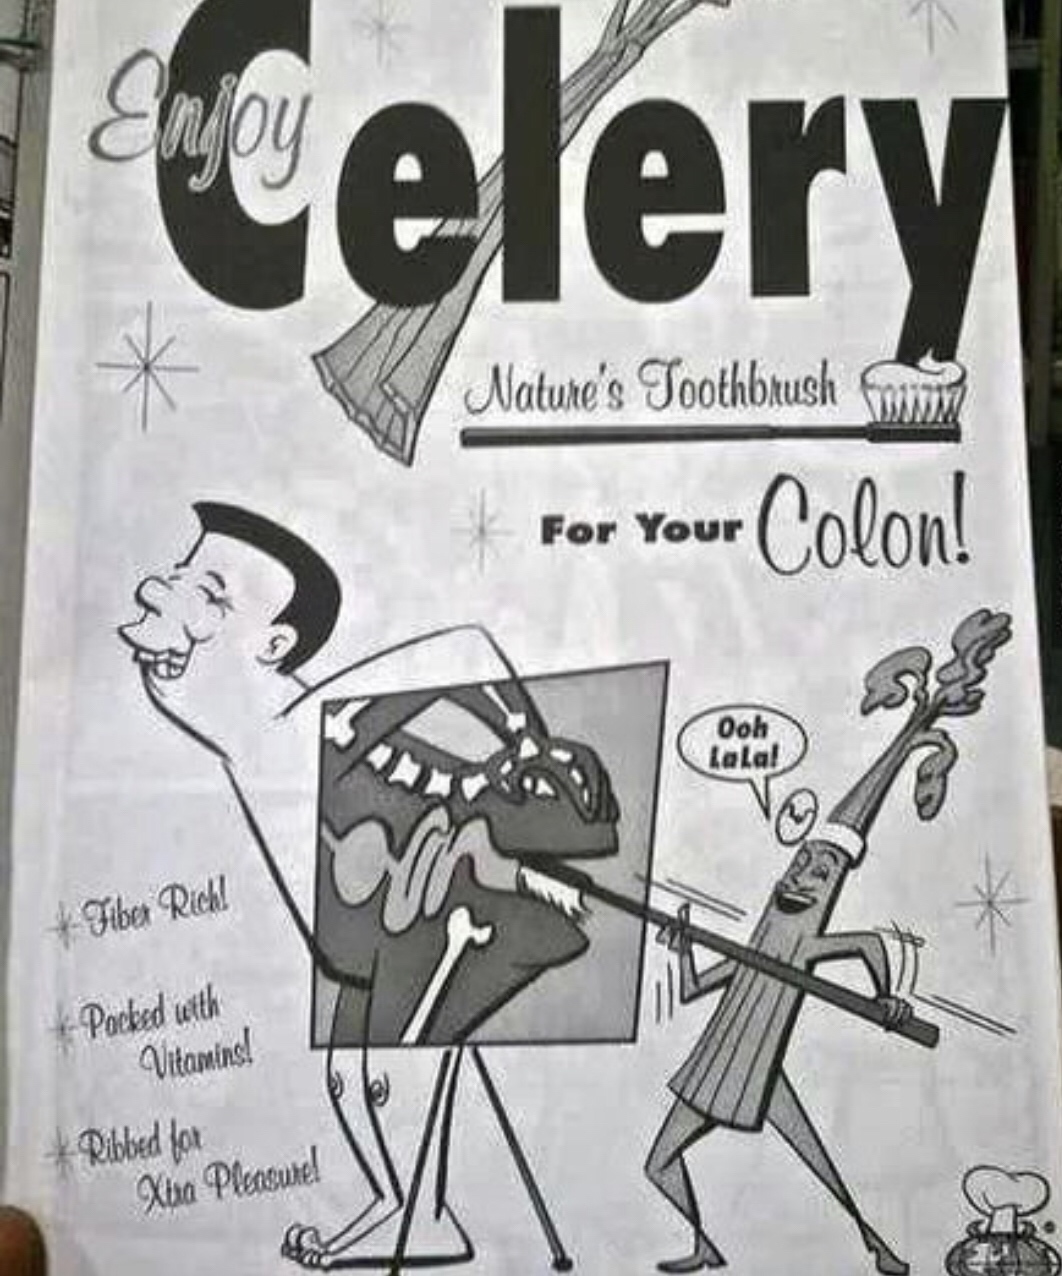 celery nature's toothbrush - Enjoy a elery Nature's Toothbrush us For Your Colon! For Your Fiber Rich! Porked with Vitamins! Ribbed for Xua Pentut.